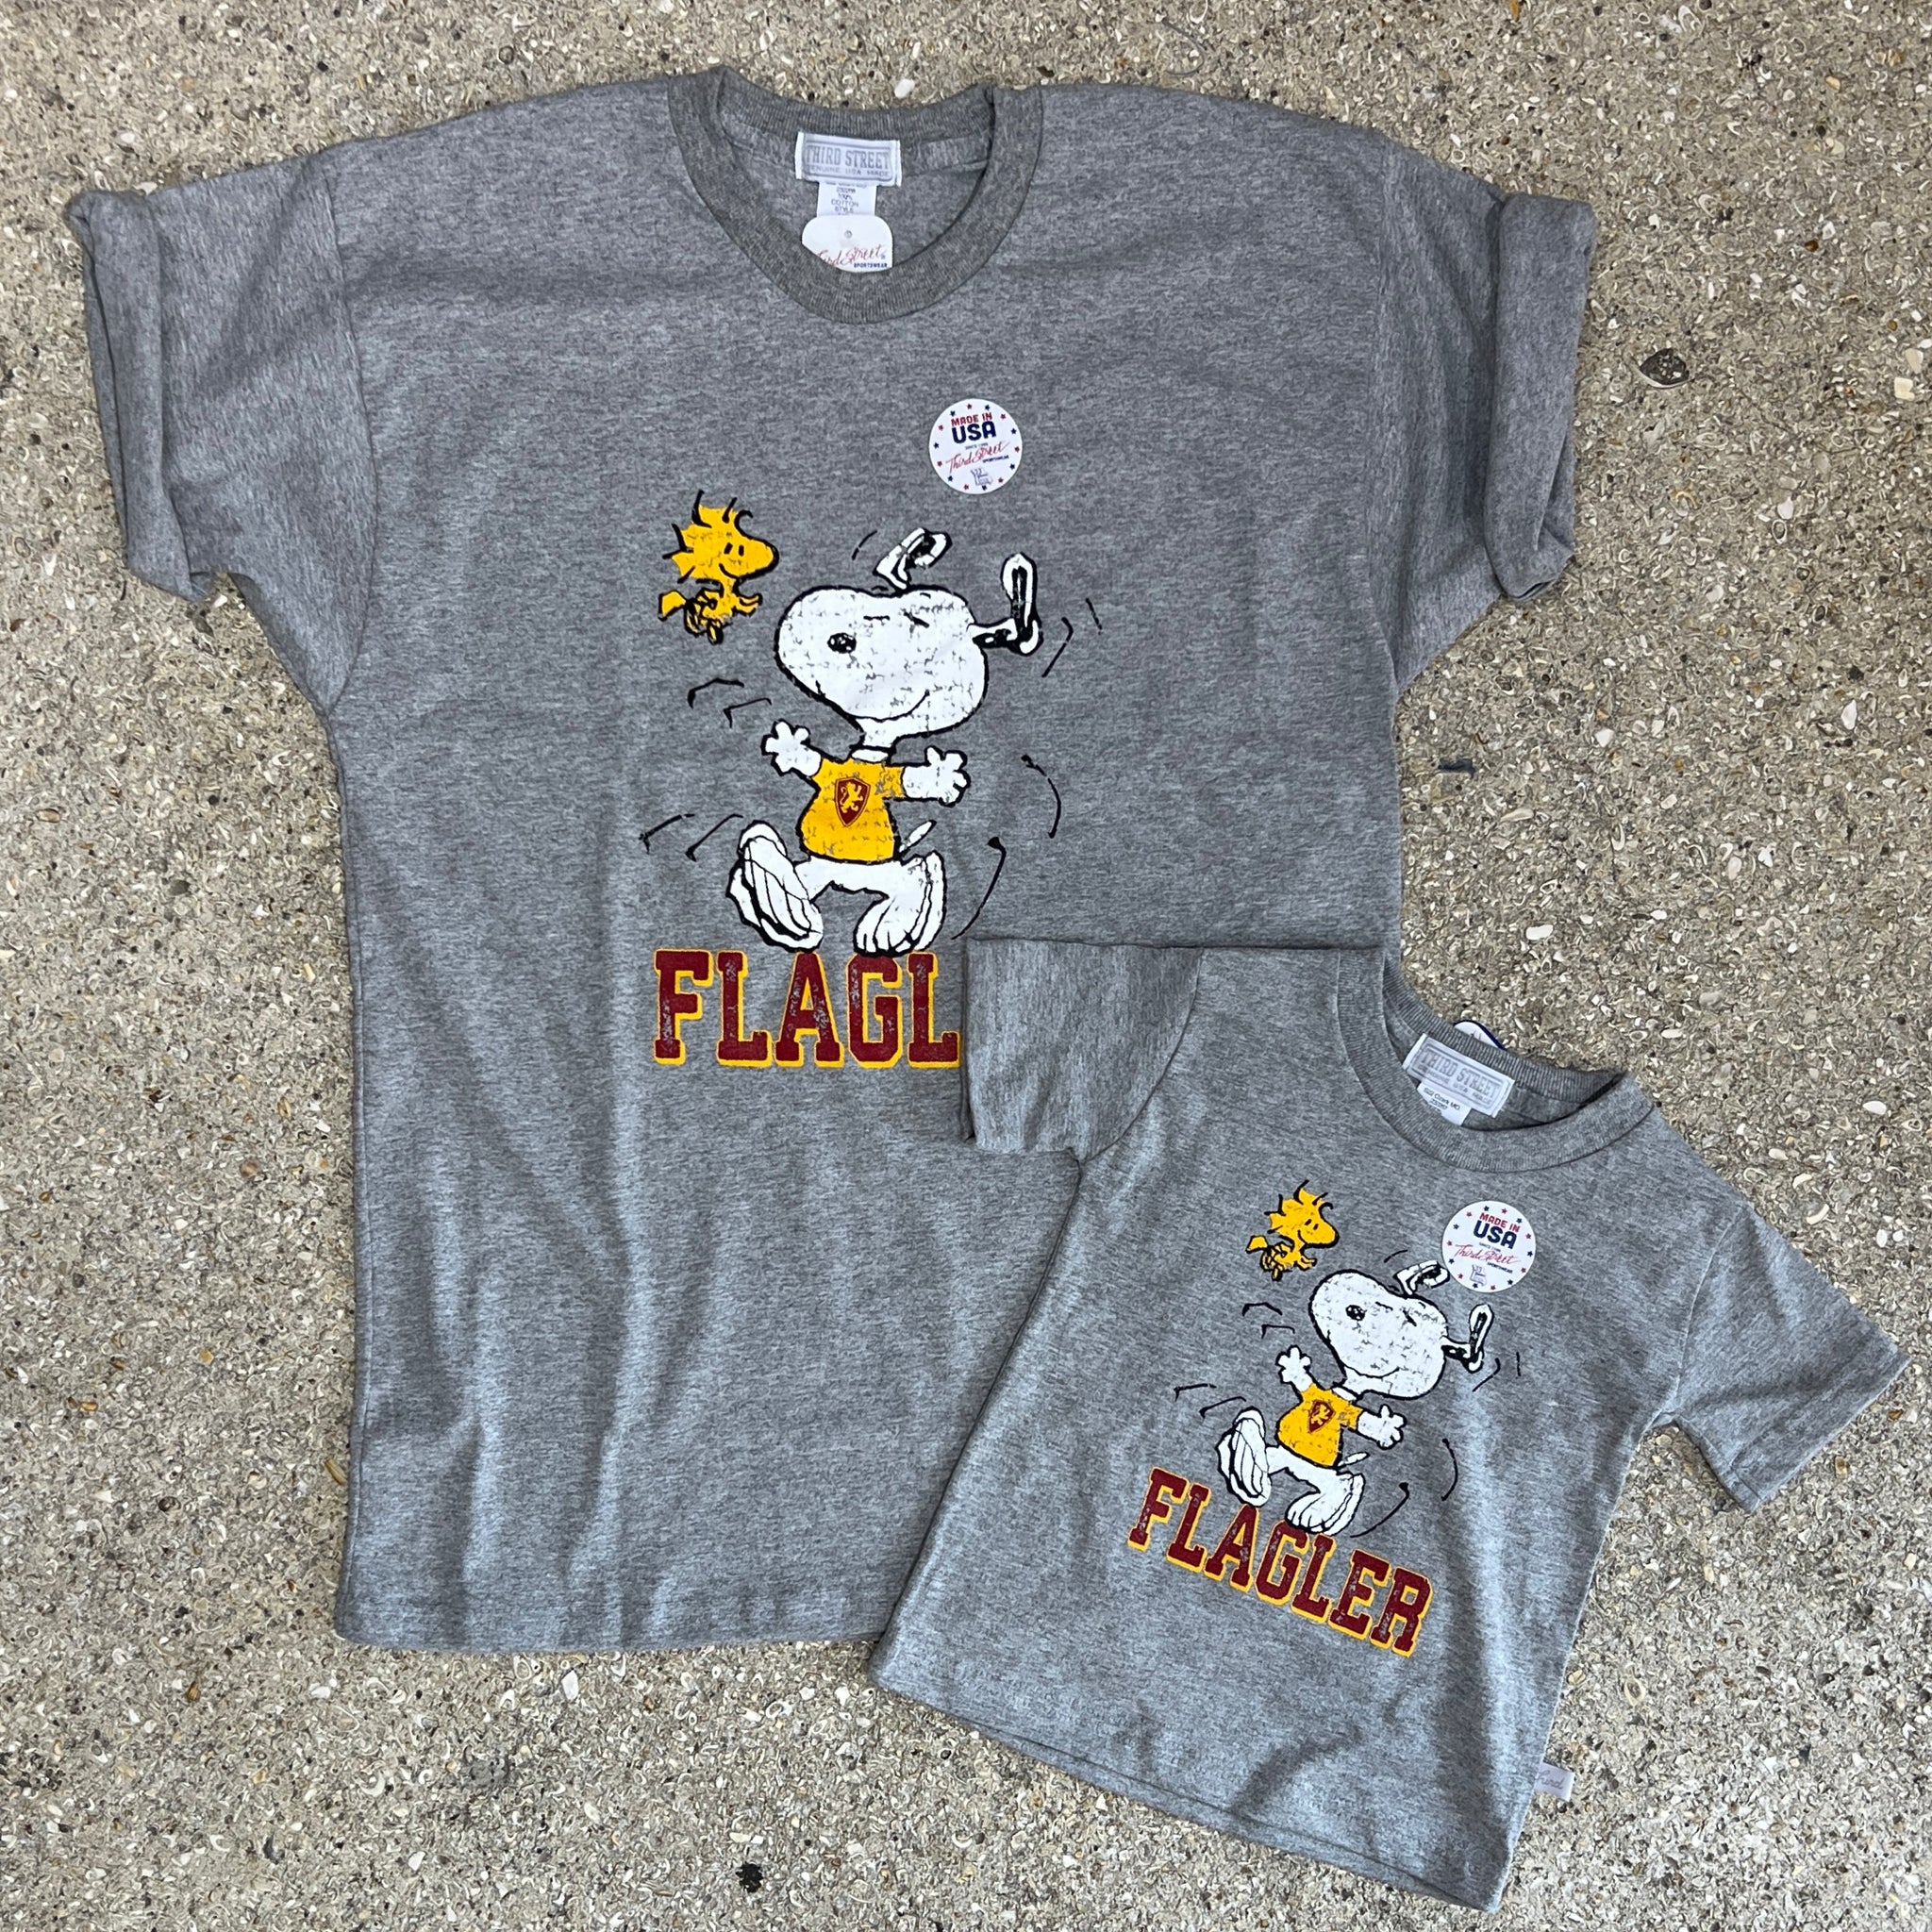 2 grey t-shirts with woodstock and snoopy over crimson imprint saying Flagler